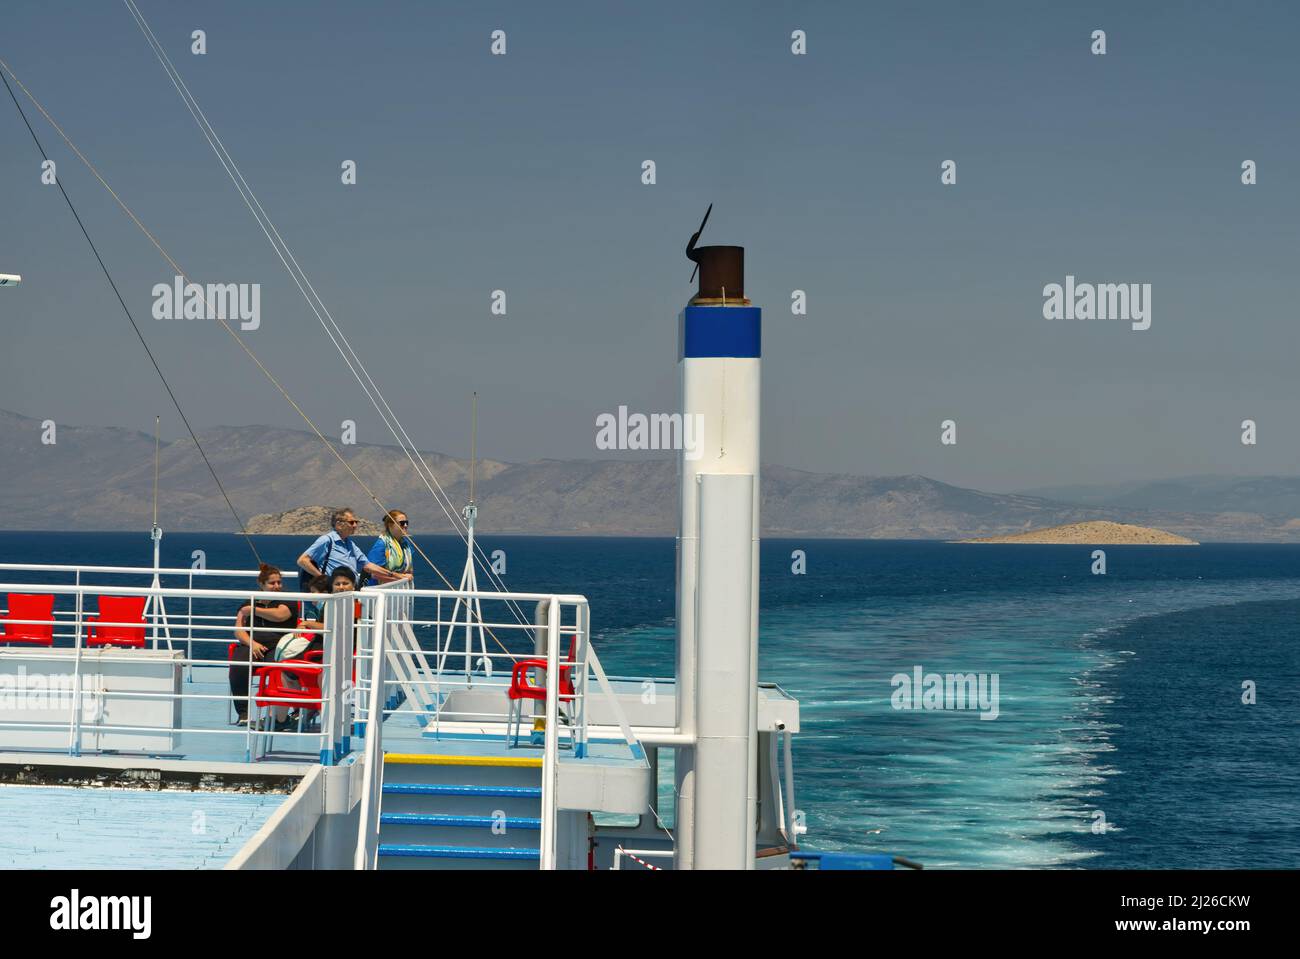 Athens, Greece - may 27, 2021: tourists on Cruise ship on the deck of the ferry during sail to Aegina island. Stock Photo